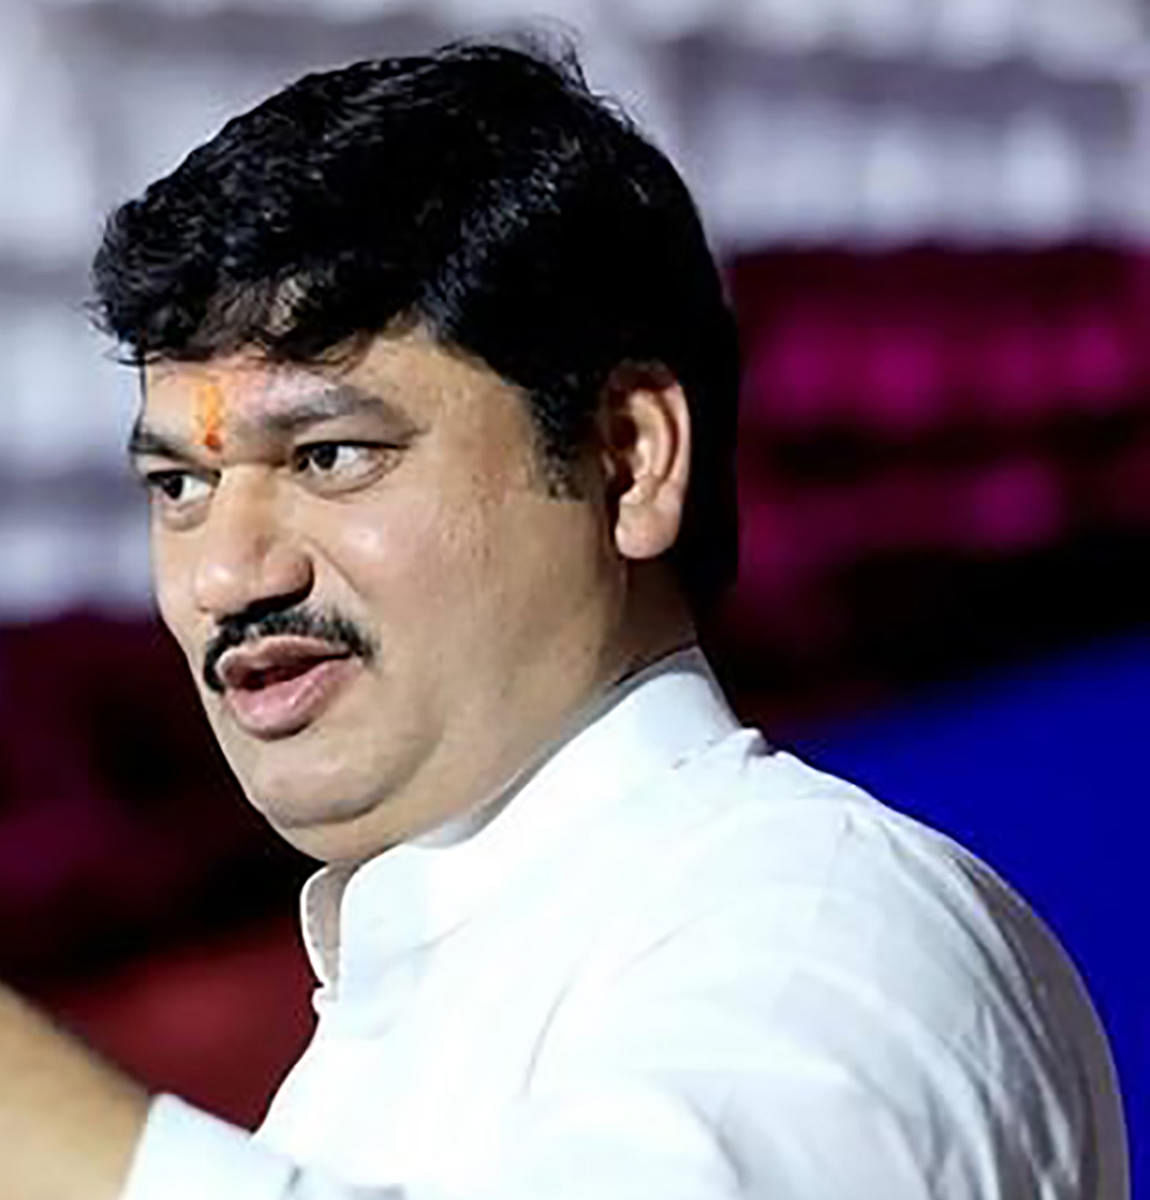 NCP MLA Dhananjay Munde wrote to Chief Minister Uddhav Thackeray on Tuesday, demanding withdrawal of cases related to the Koregaon-Bhima violence. (DH Photo)